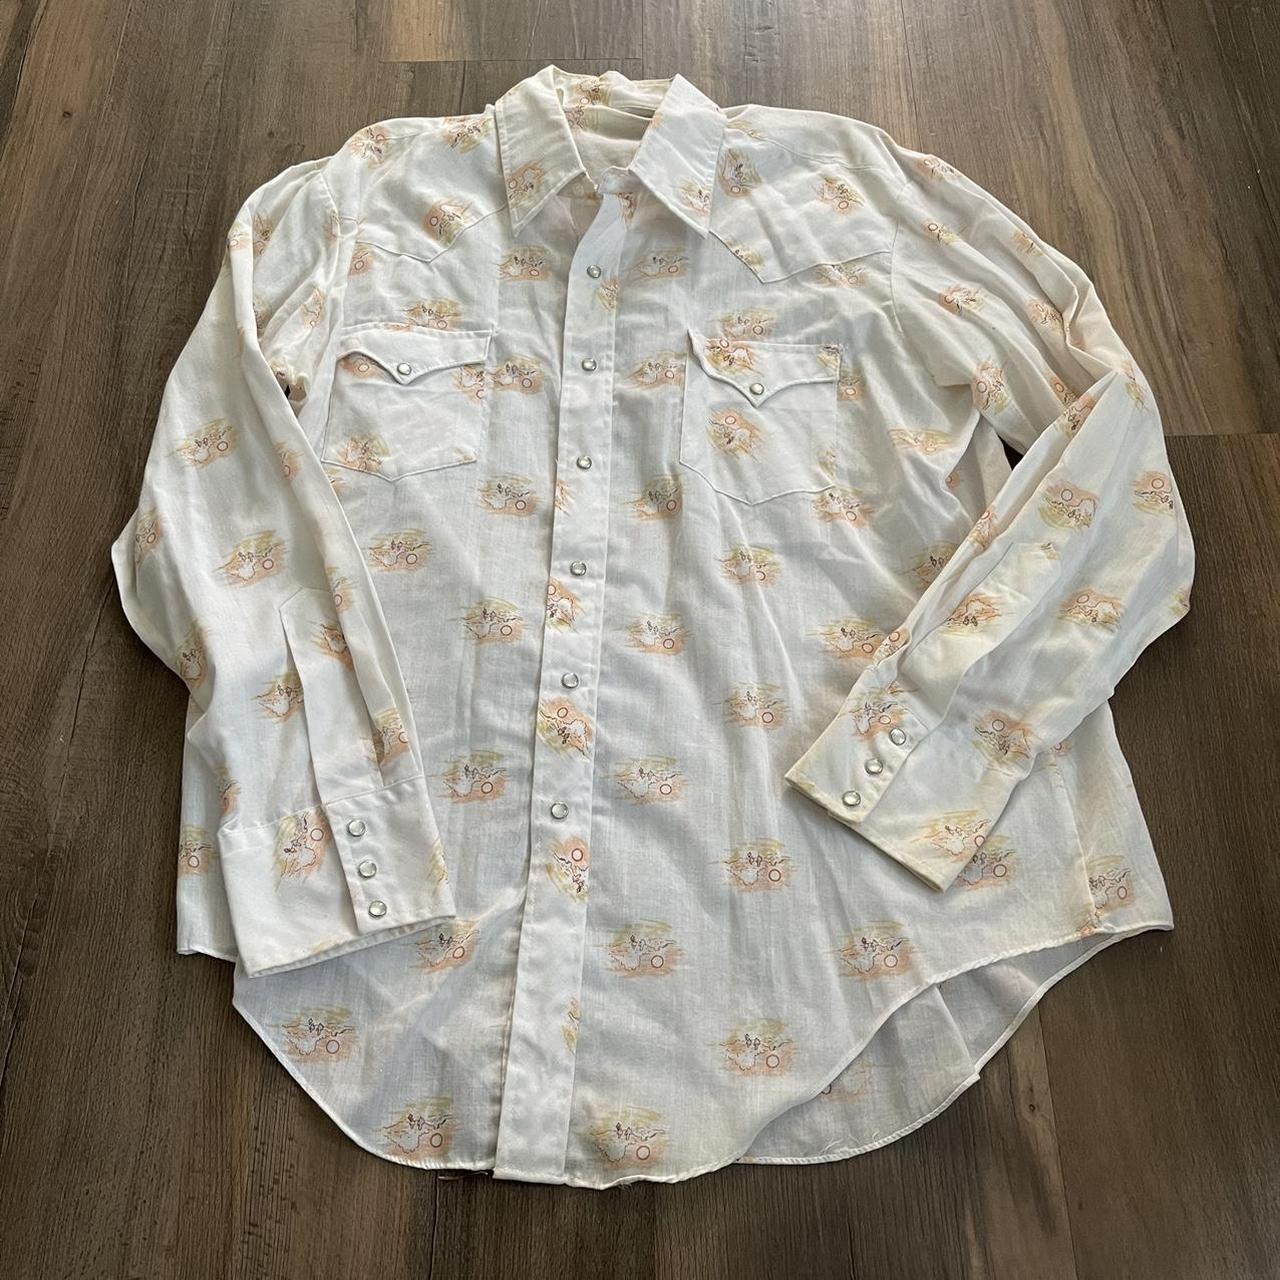 1980s Western Shirt With Pearl Snaps / Men's Medium 